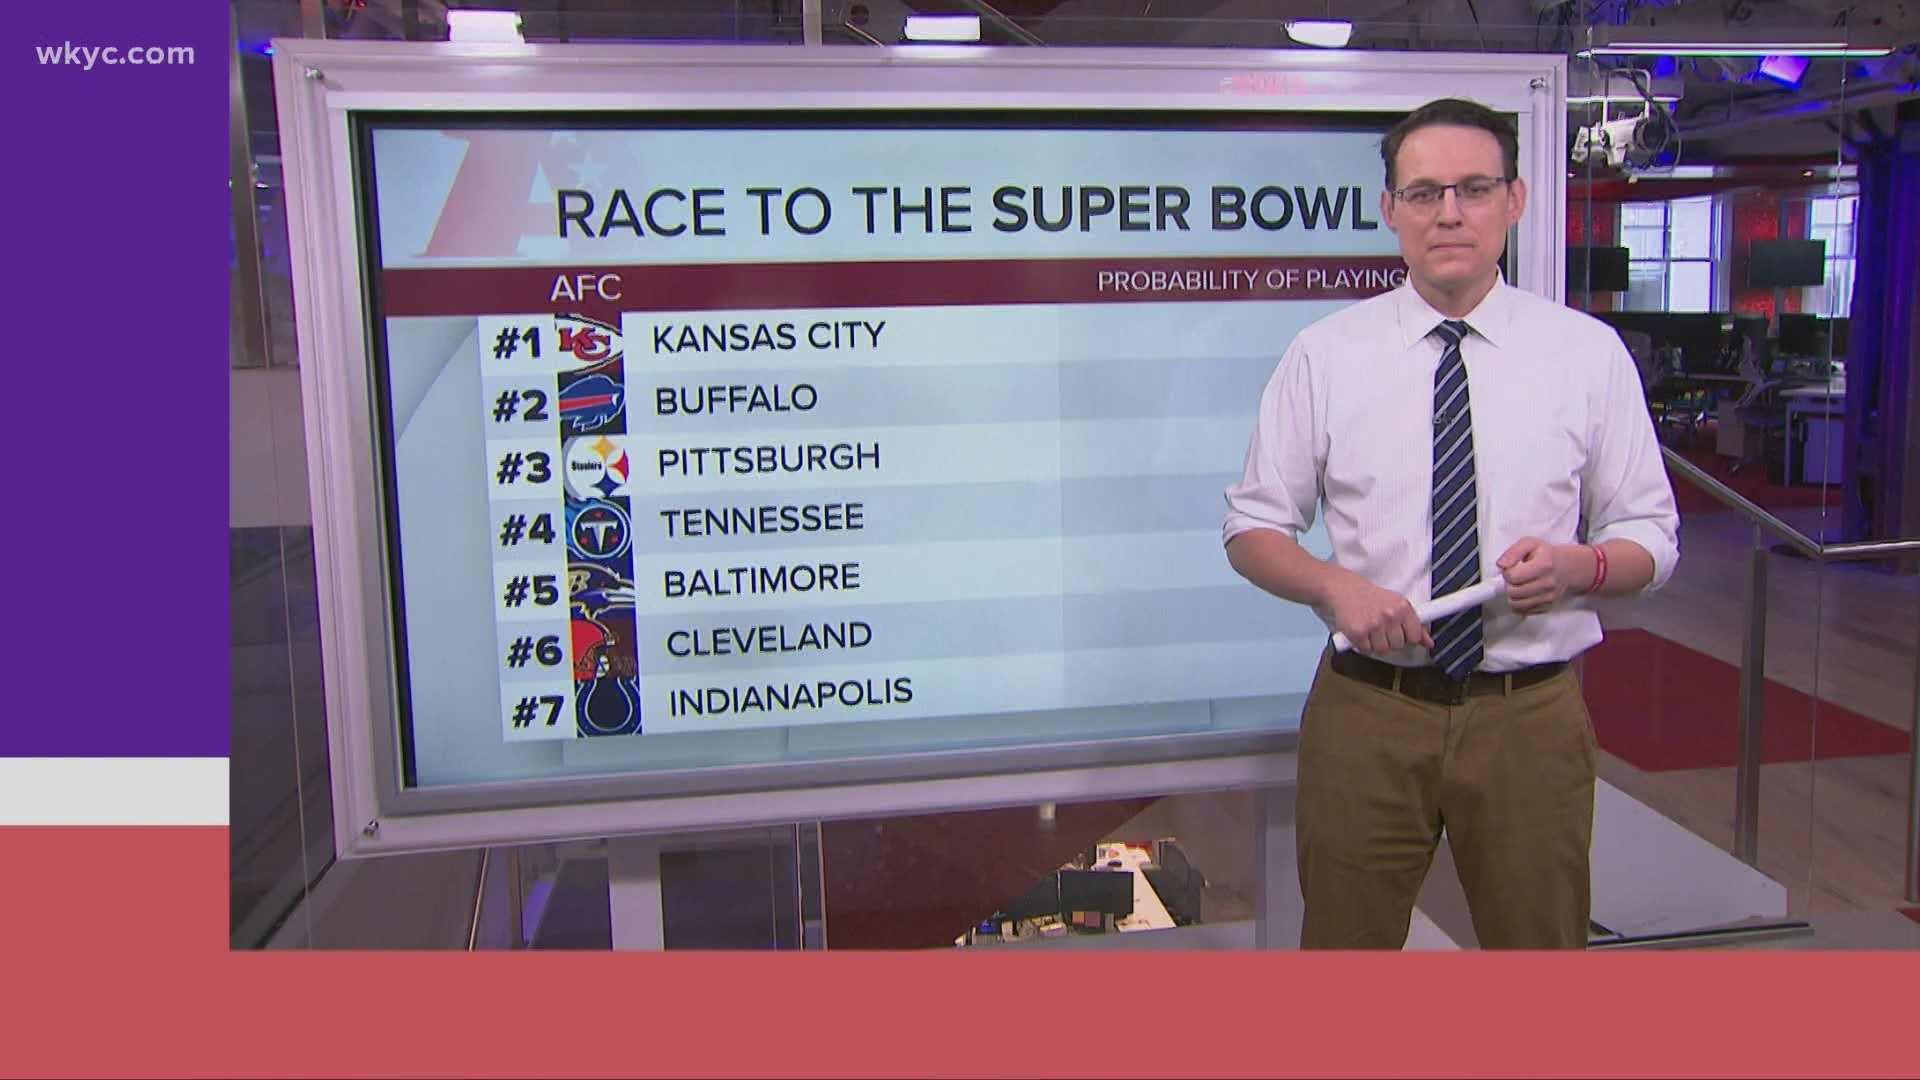 Browns fans, you may want to look away. MSNBC's Steve Kornacki did the math on how good it looks for each team hoping to make it to Tampa this year.